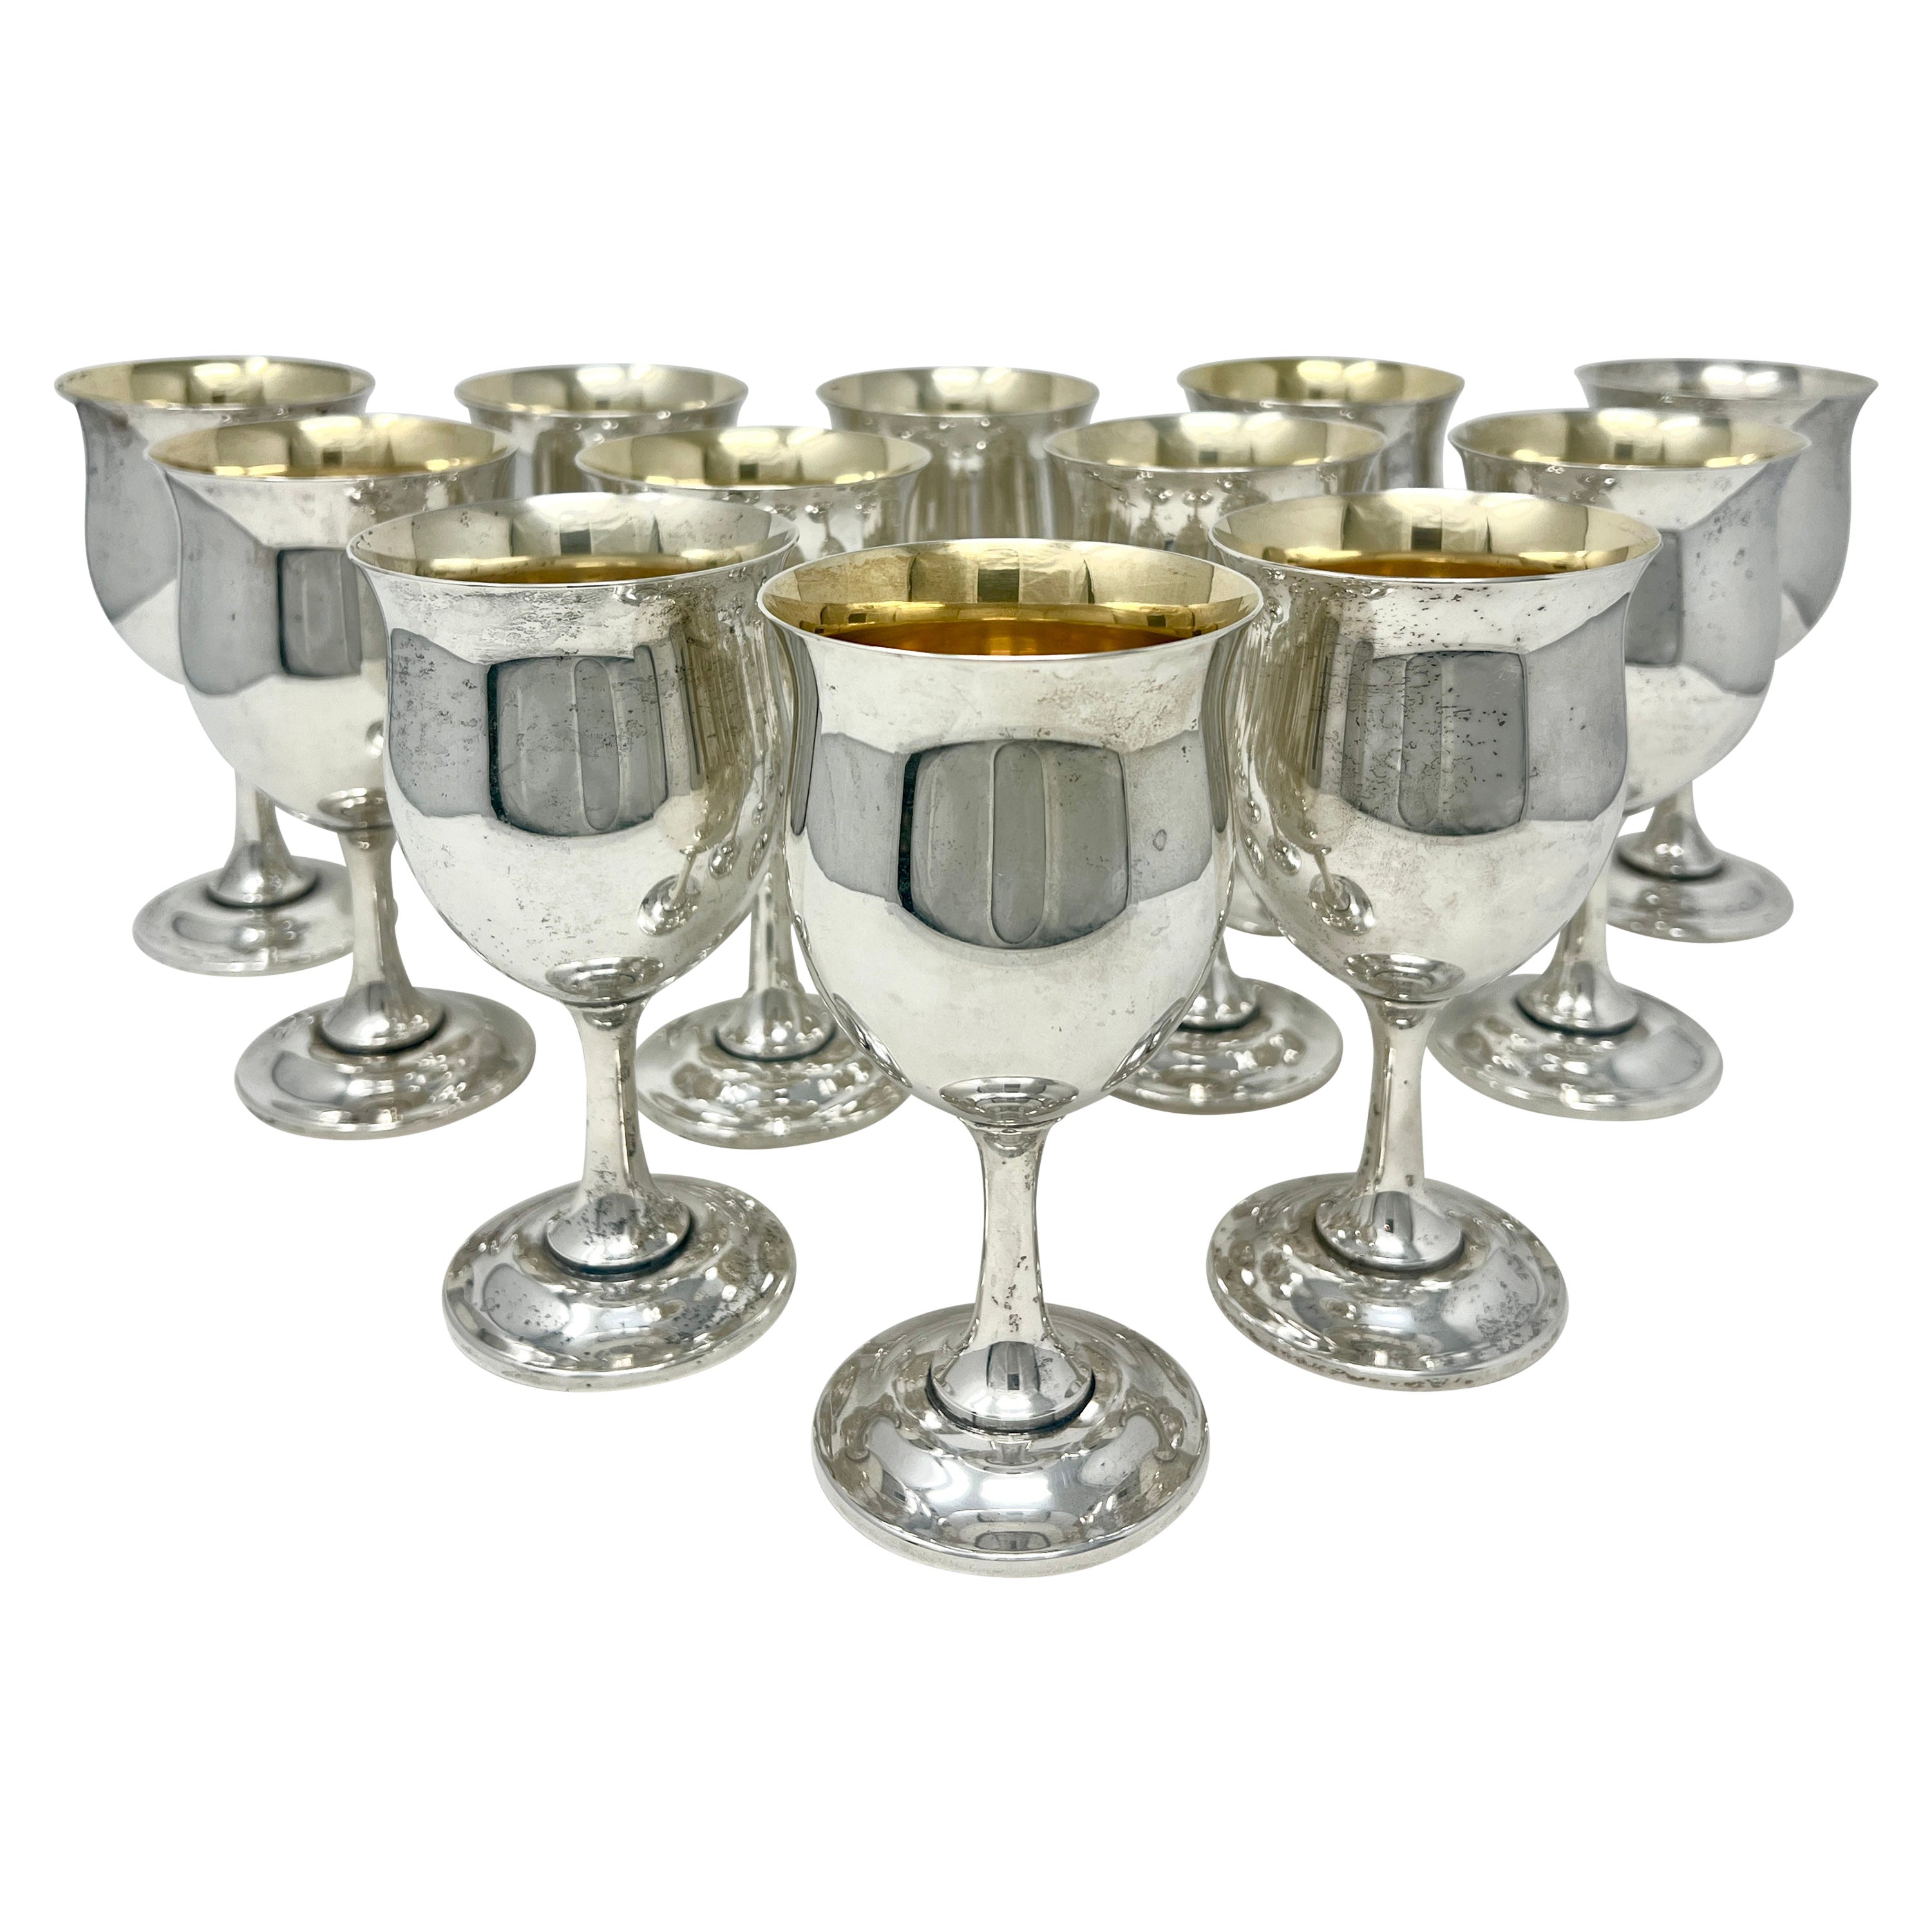 Set of 12 Estate American Reed & Barton Sterling Silver Wine Goblets, Circa 1930 For Sale